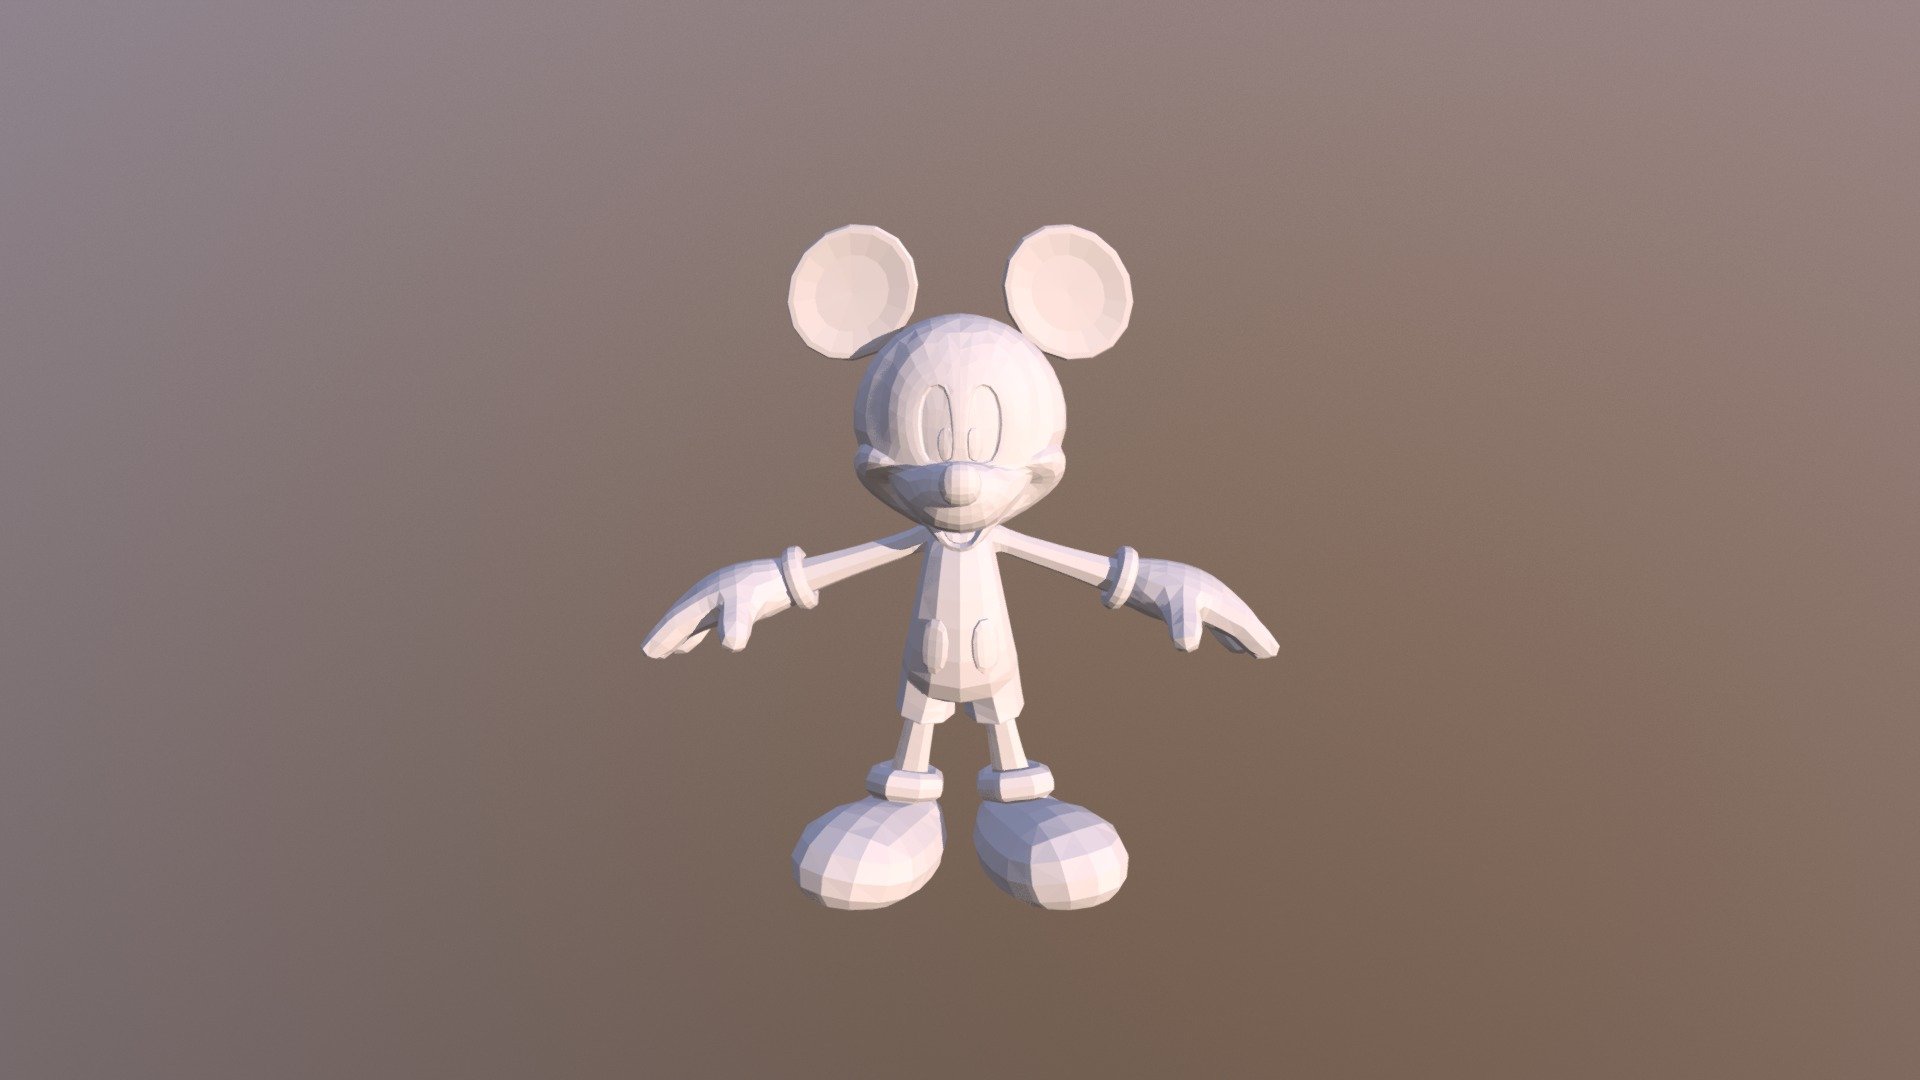 Mickey mouse - 3D model by Sidefx (@Justin.Rossi) [7234710] - Sketchfab